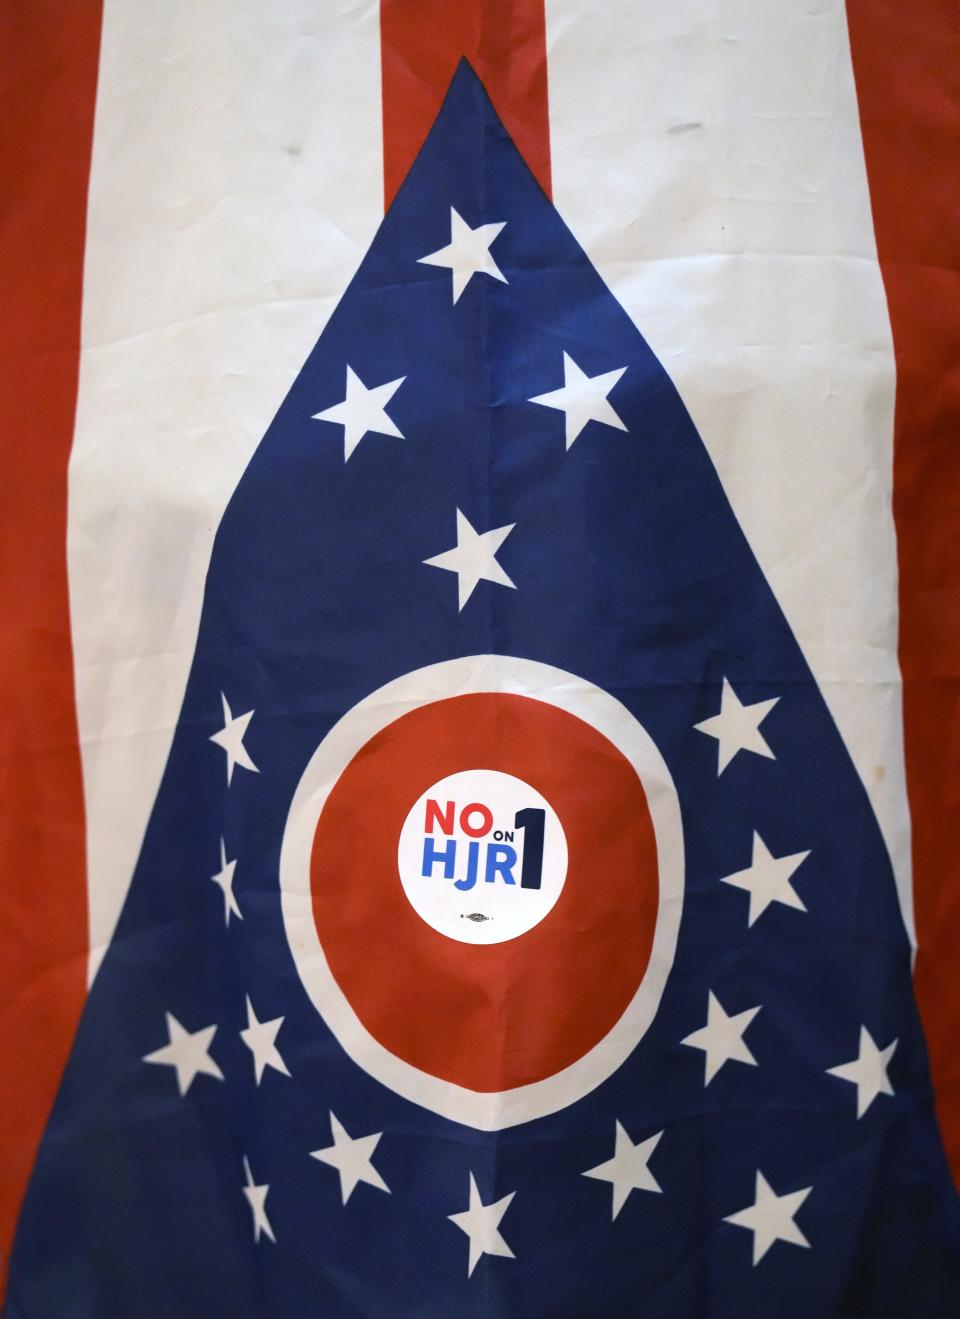 A demonstrator wears an Ohio flag in the rotunda of the Ohio Statehouse on Wednesday to protest HJR 1/SJR 2, which would require a 60% vote to approve constitutional amendments.